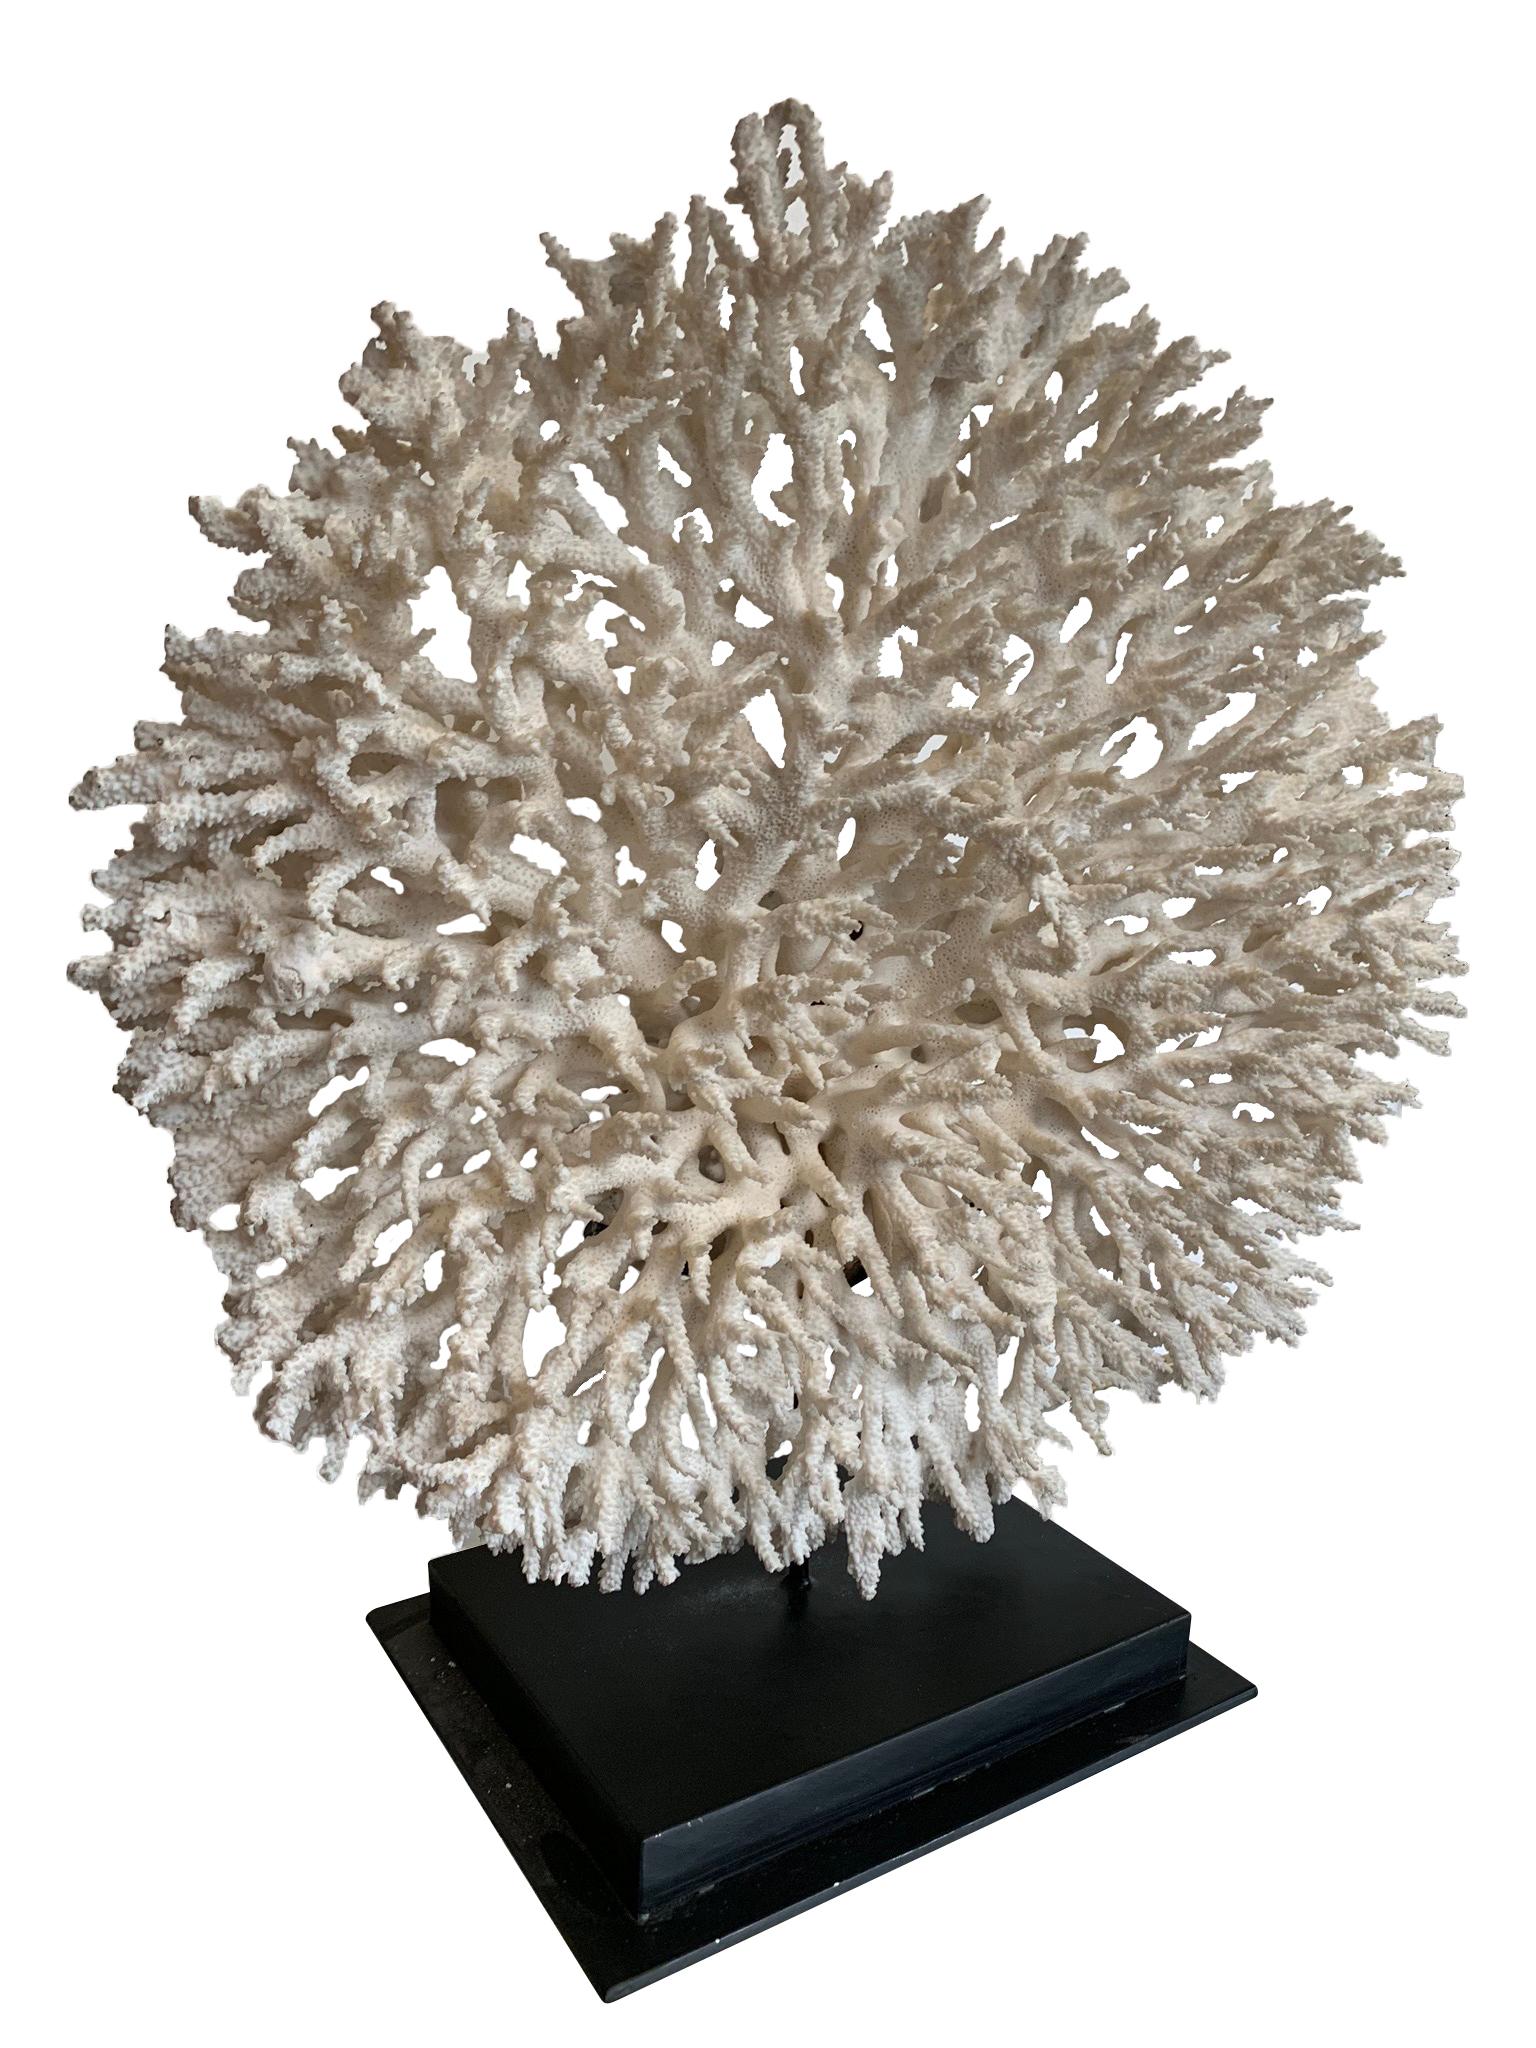 An stunning large antique circular piece of lace coral mounted on black metal museum stand. 

Please note this item cannot be shipped to the USA or outside Europe.